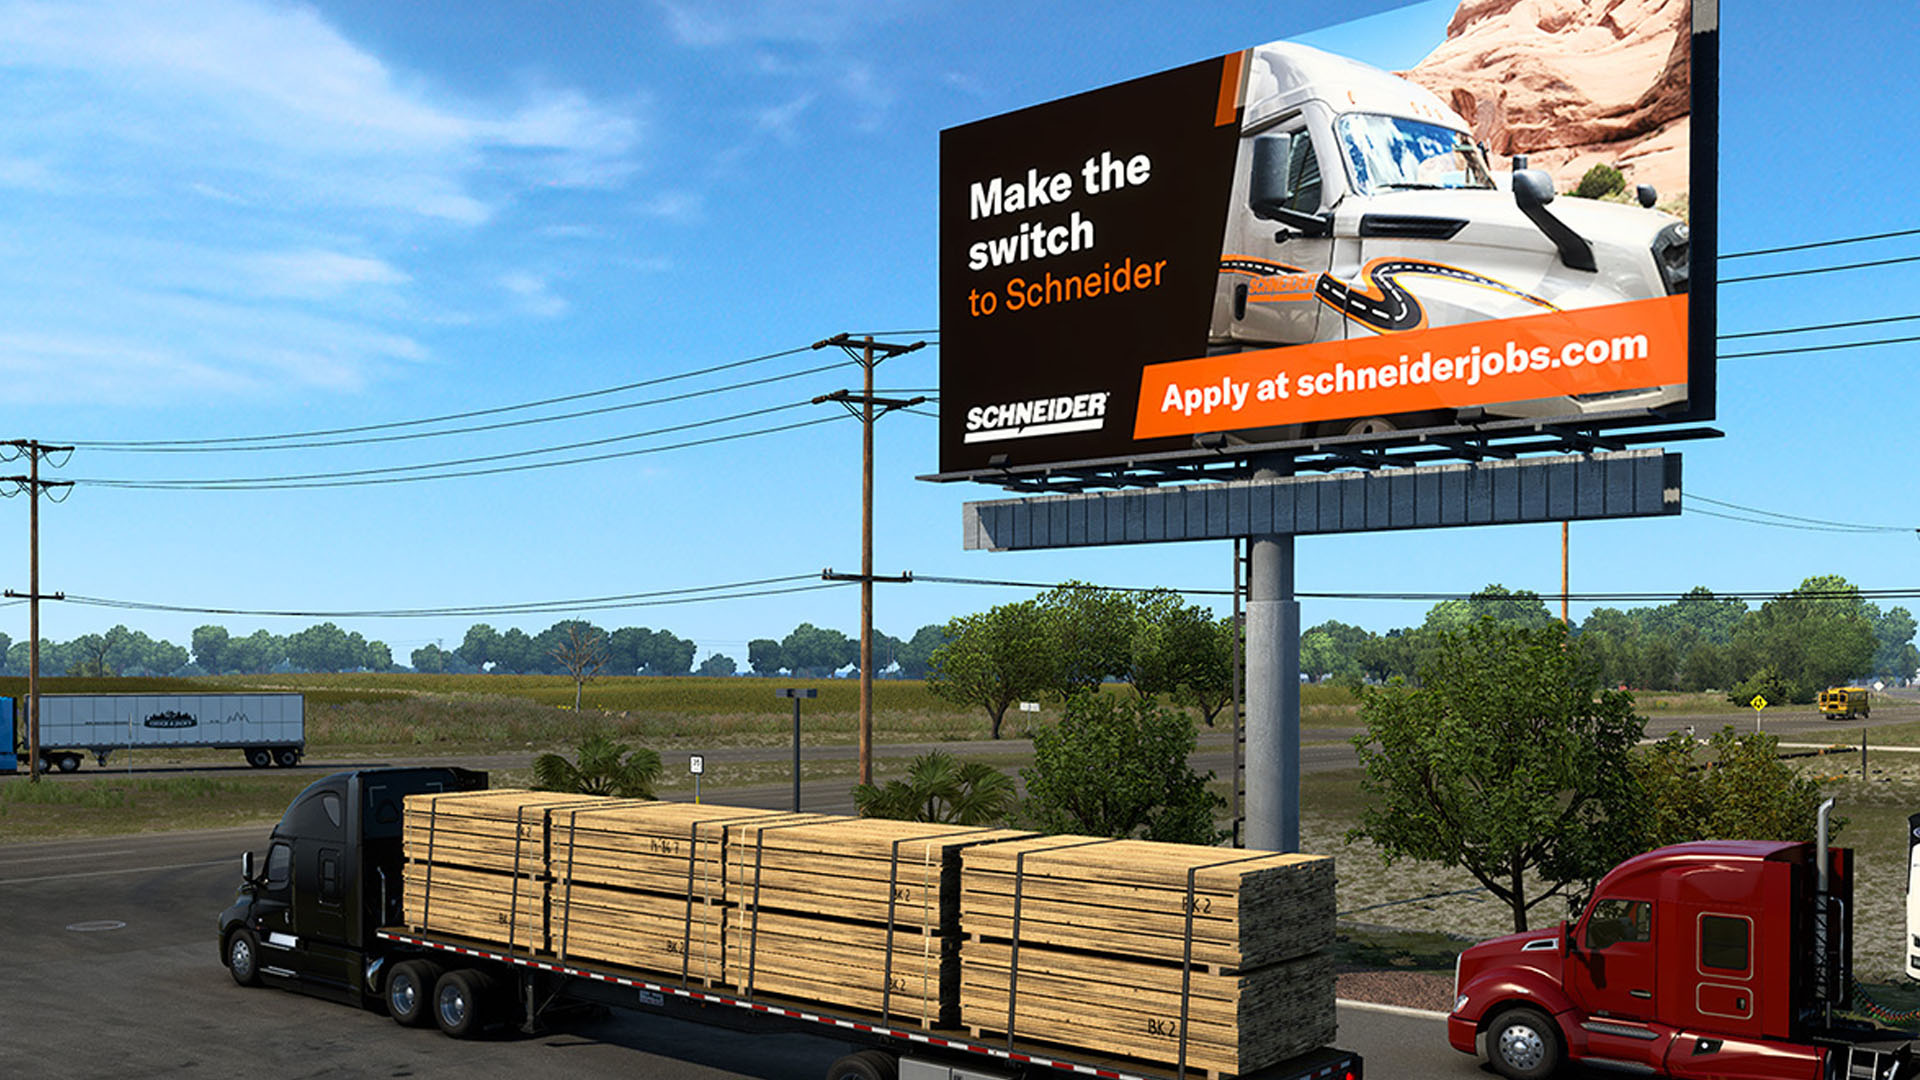 American Truck Simulator gamers are being recruited to drive actual large rigs